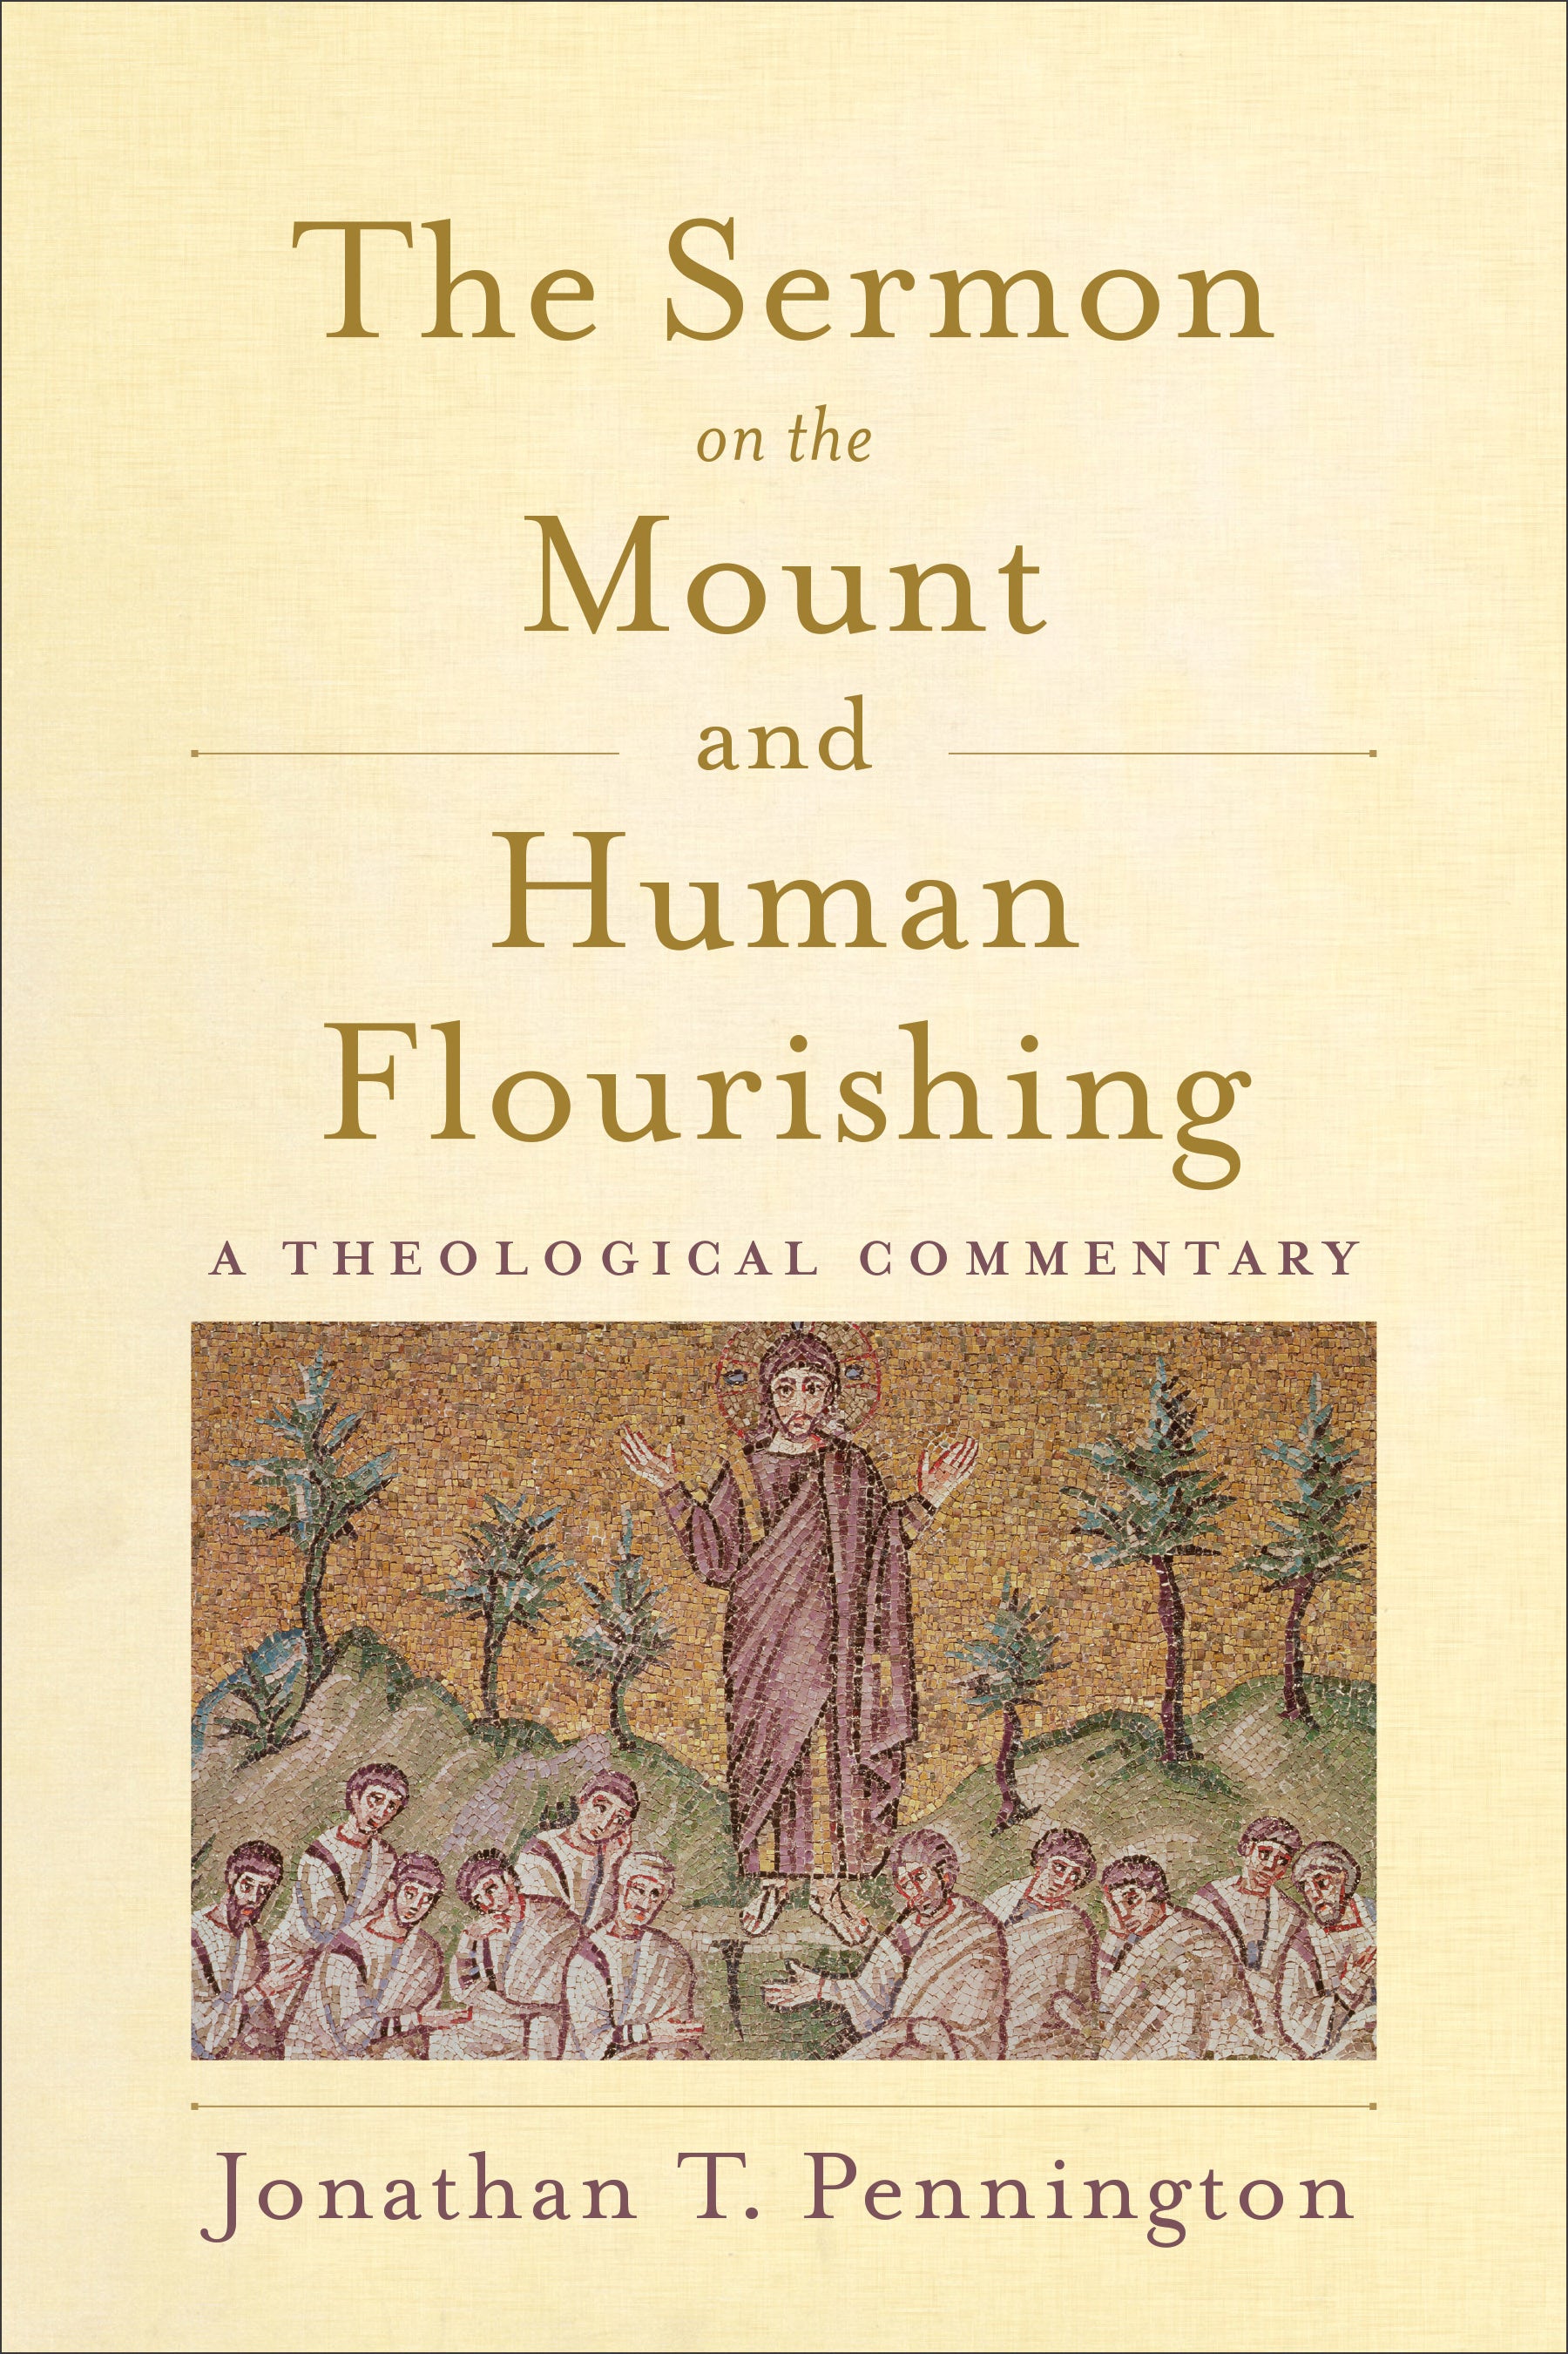 Image of The Sermon on the Mount and Human Flourishing other